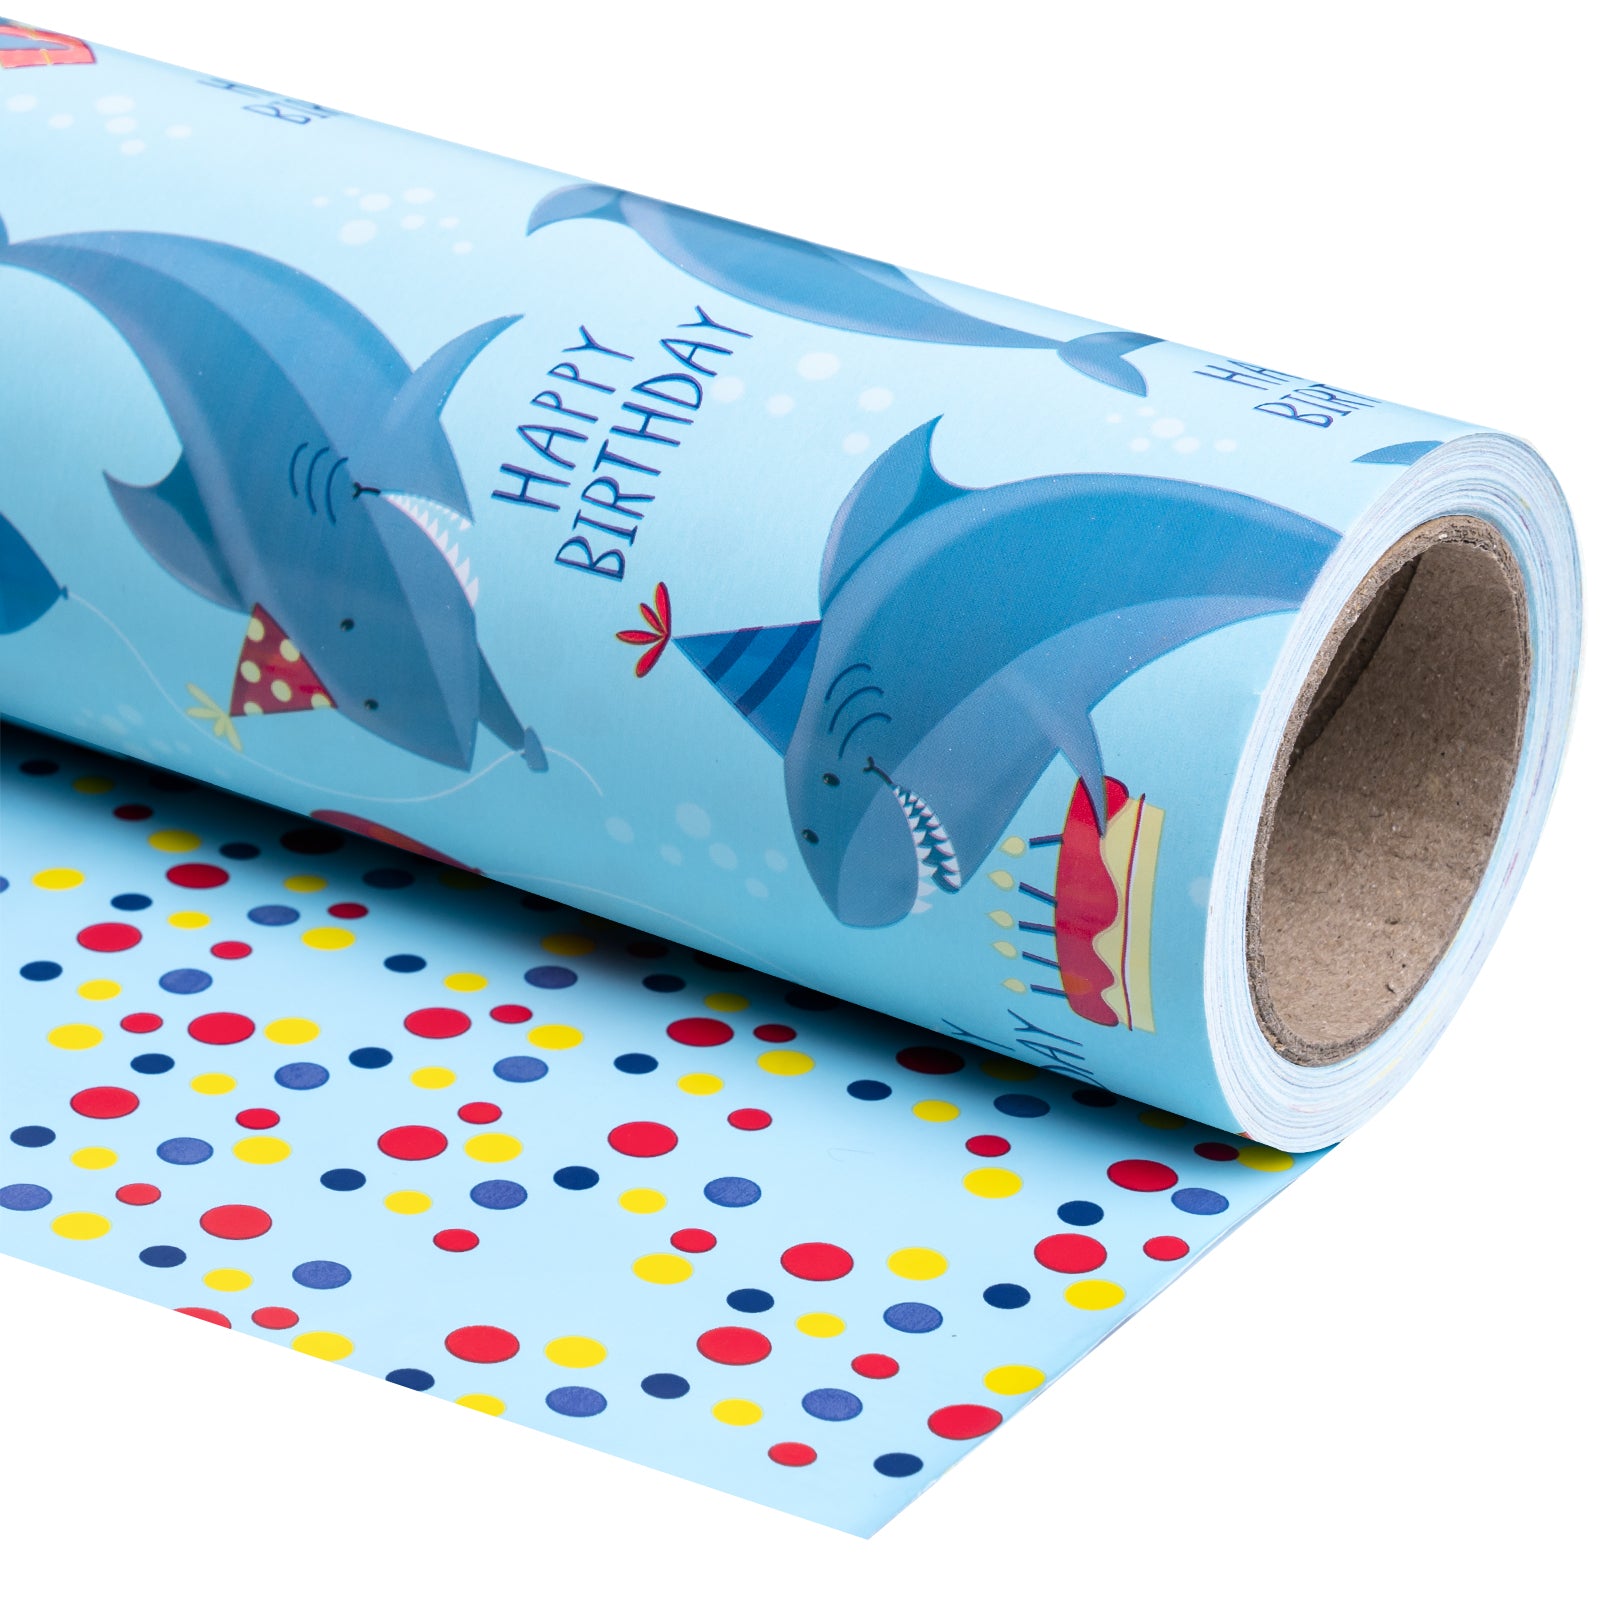 Shark Birthday Blue Wrapping Paper with Colorful Polka Dot Packing Paper Supply Wrapaholic